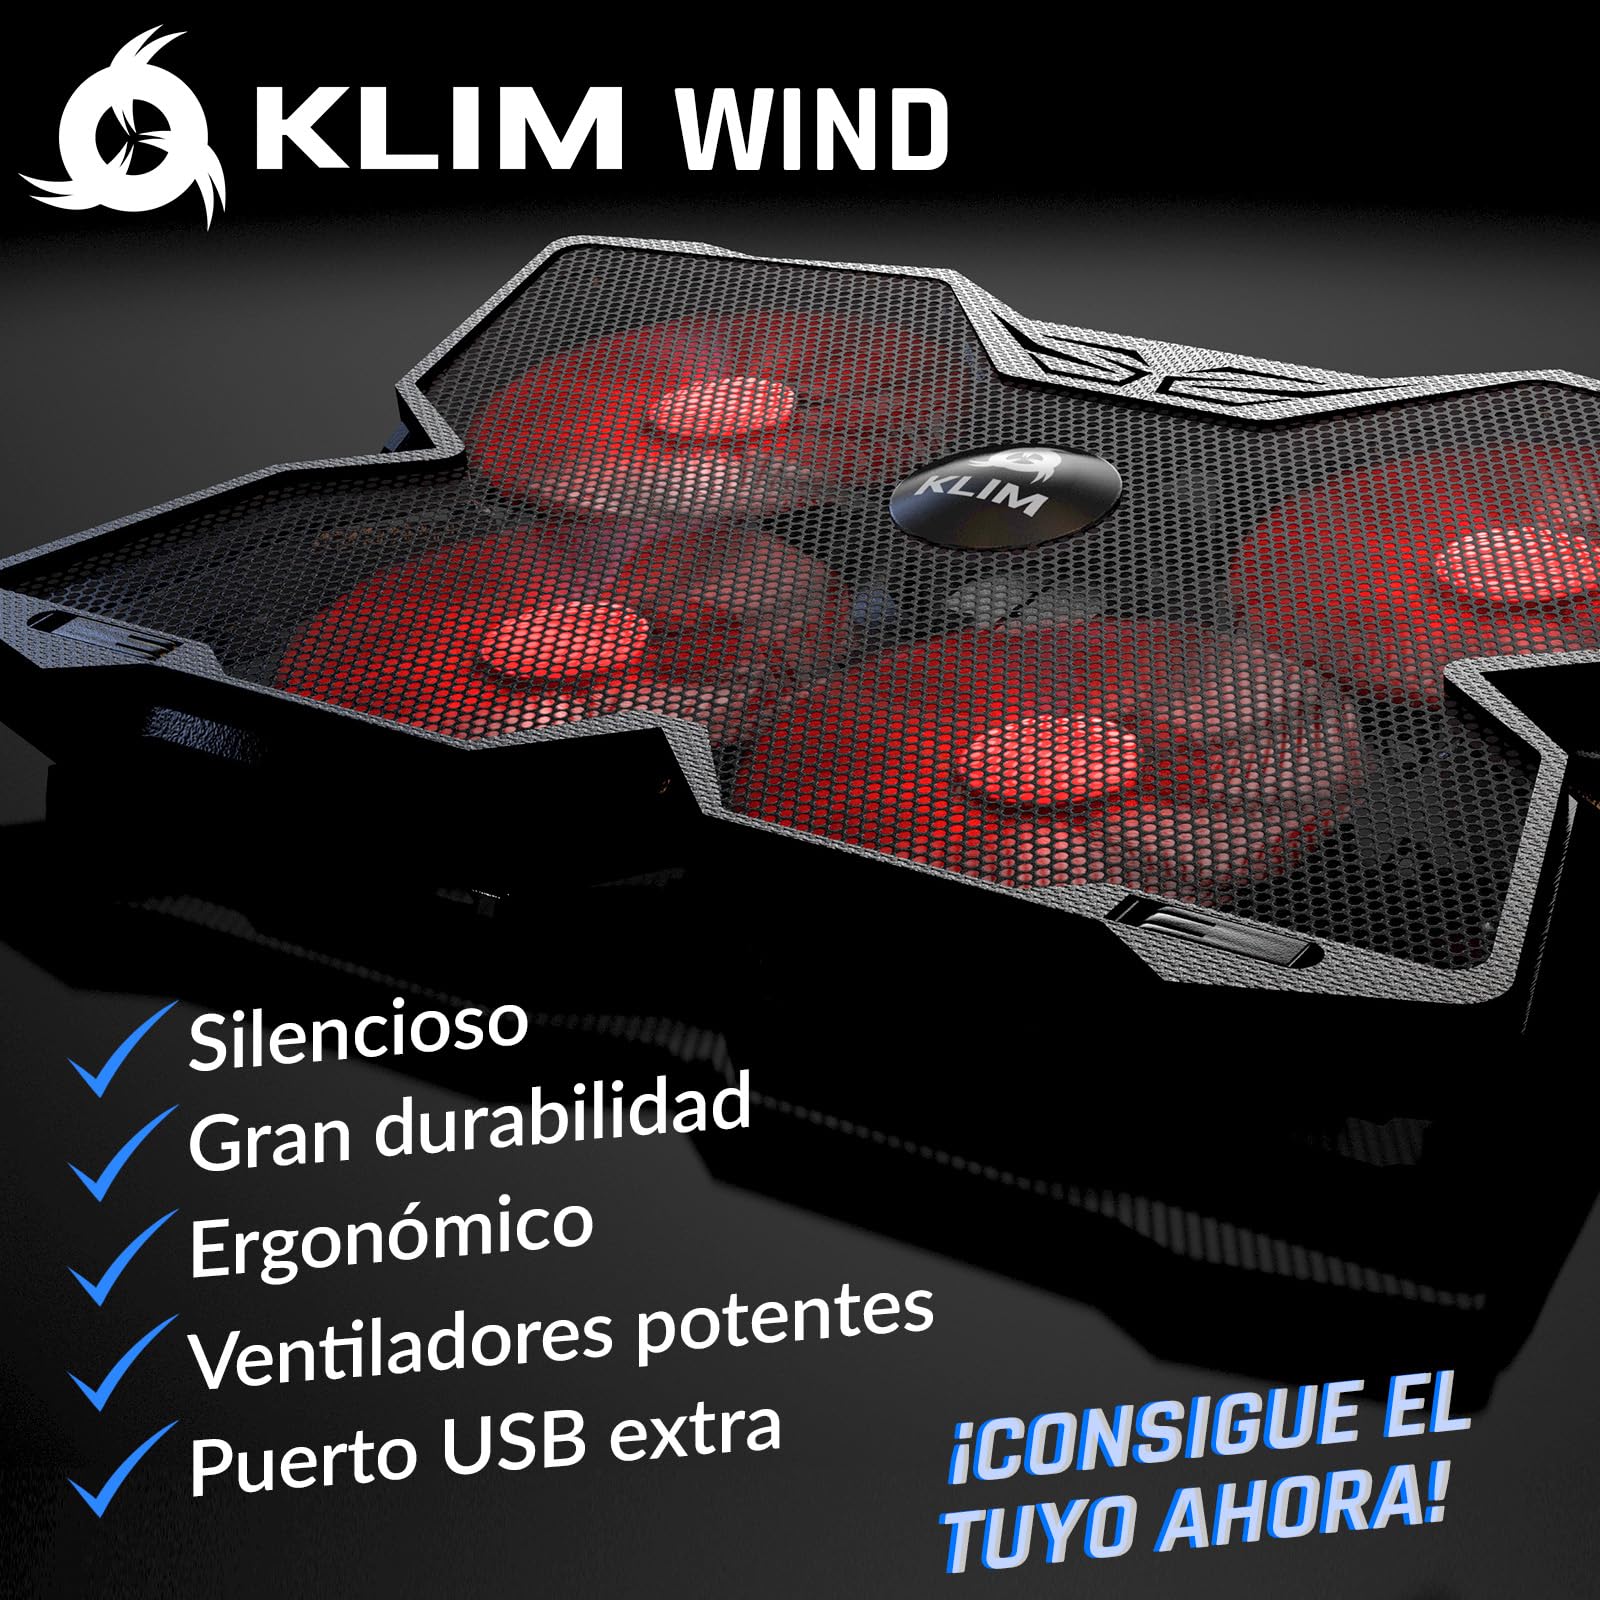 KLIM Wind - Laptop Cooling Pad - More Than 500 000 Units Sold -The Most Powerful Rapid Action Cooling Fan - Laptop Stand with 4 Cooling Fans at 1200 RPM - USB Fan - PS5, PS4 - Black - New Version 2024